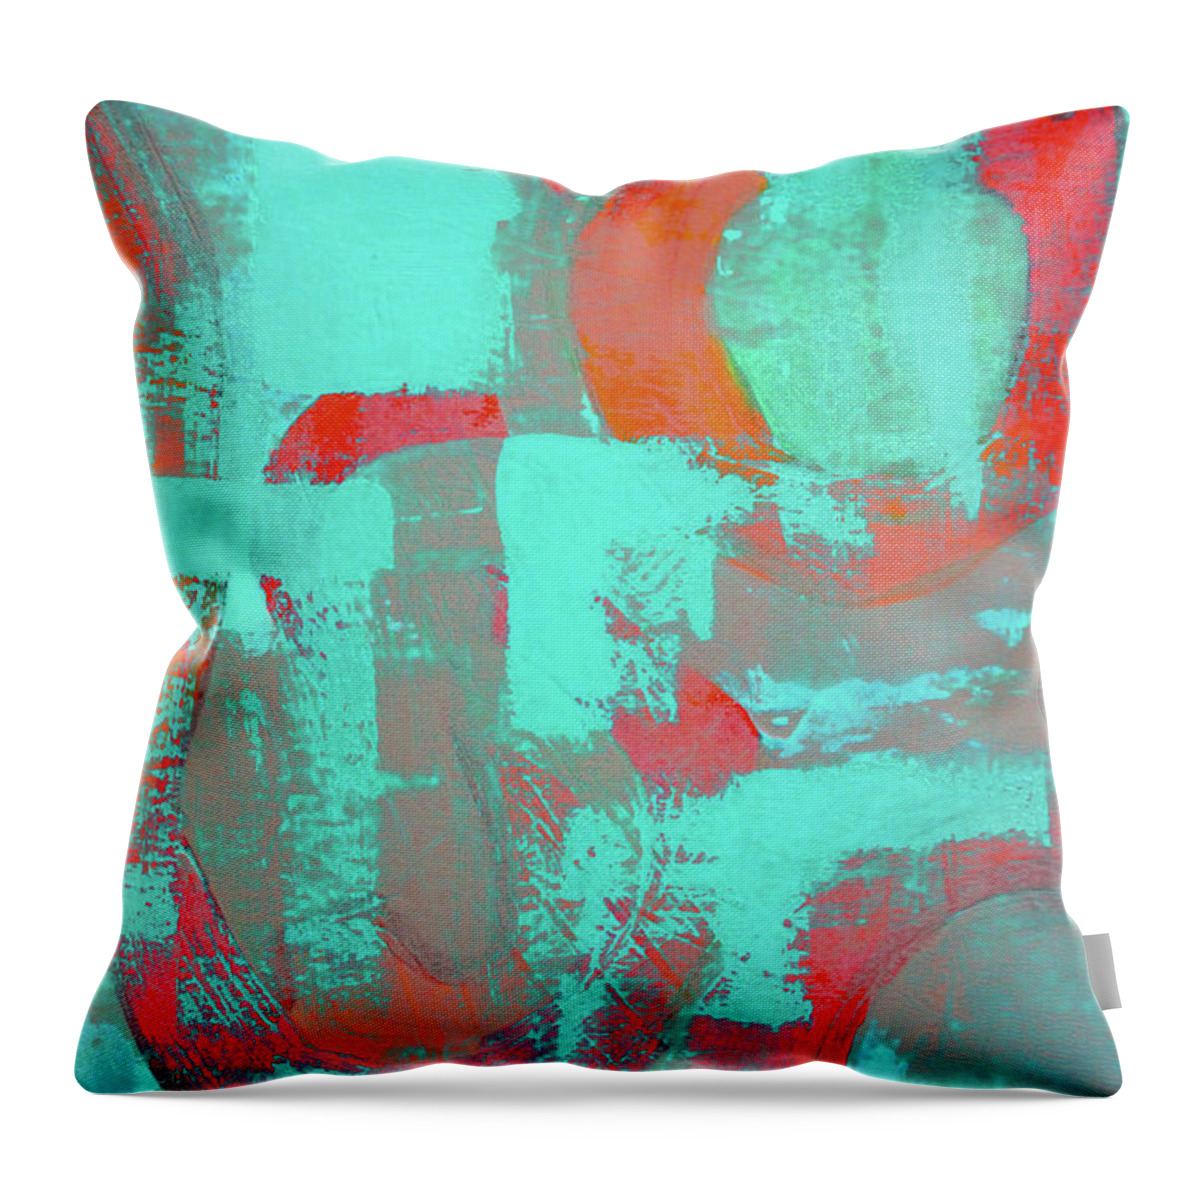 Teal Abstract Throw Pillow featuring the painting Teal Circle by Nancy Merkle